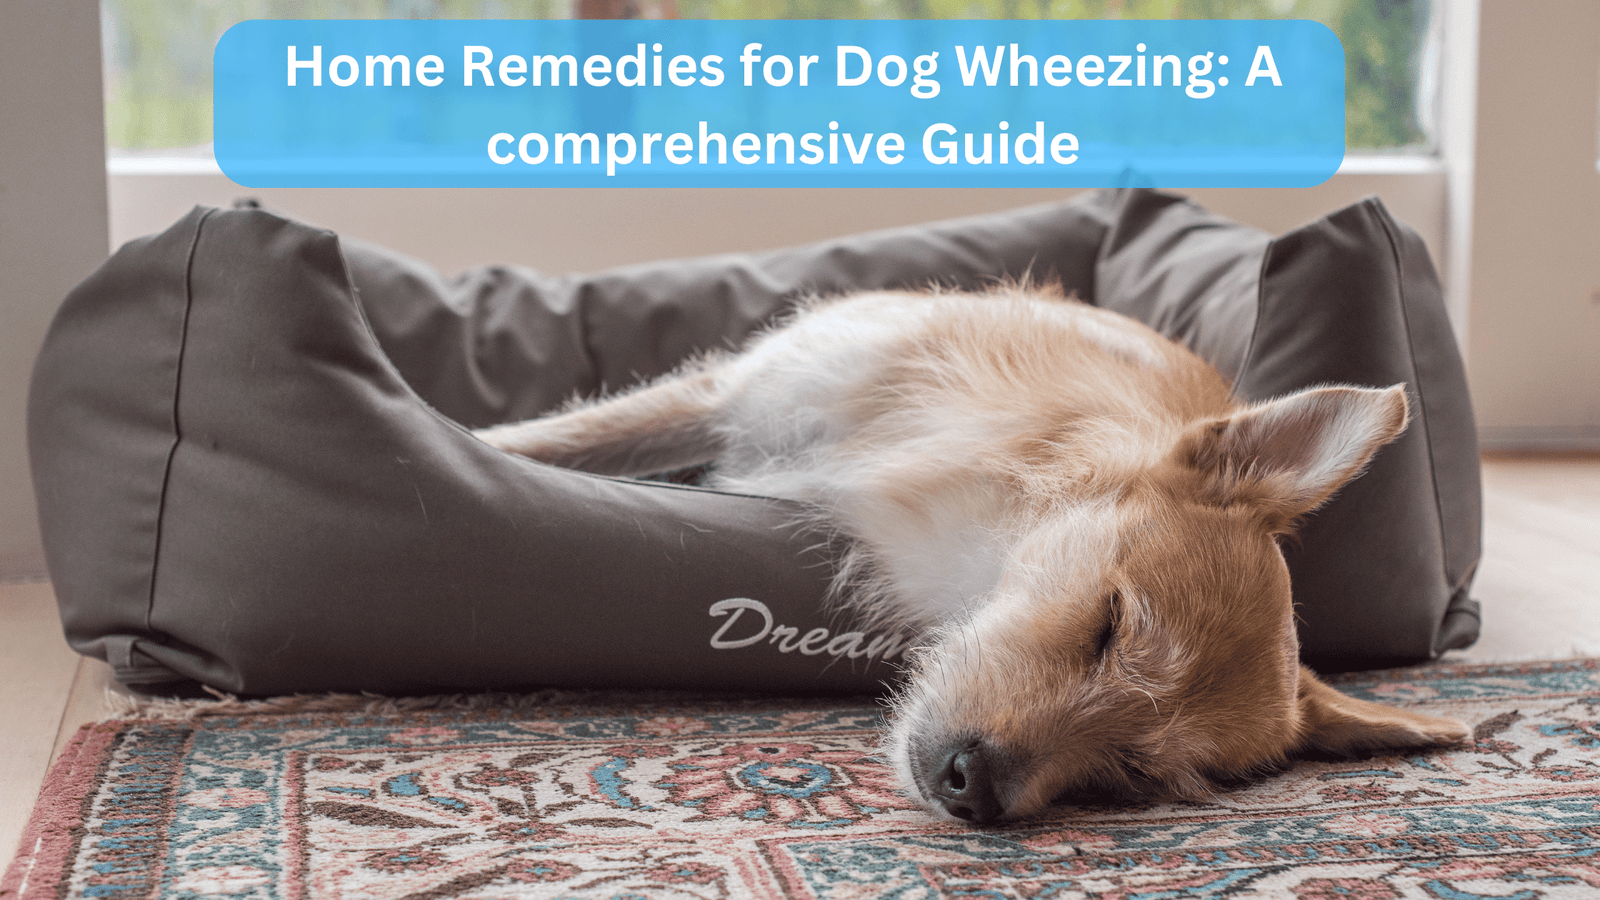 Home Remedies for Dog Wheezing